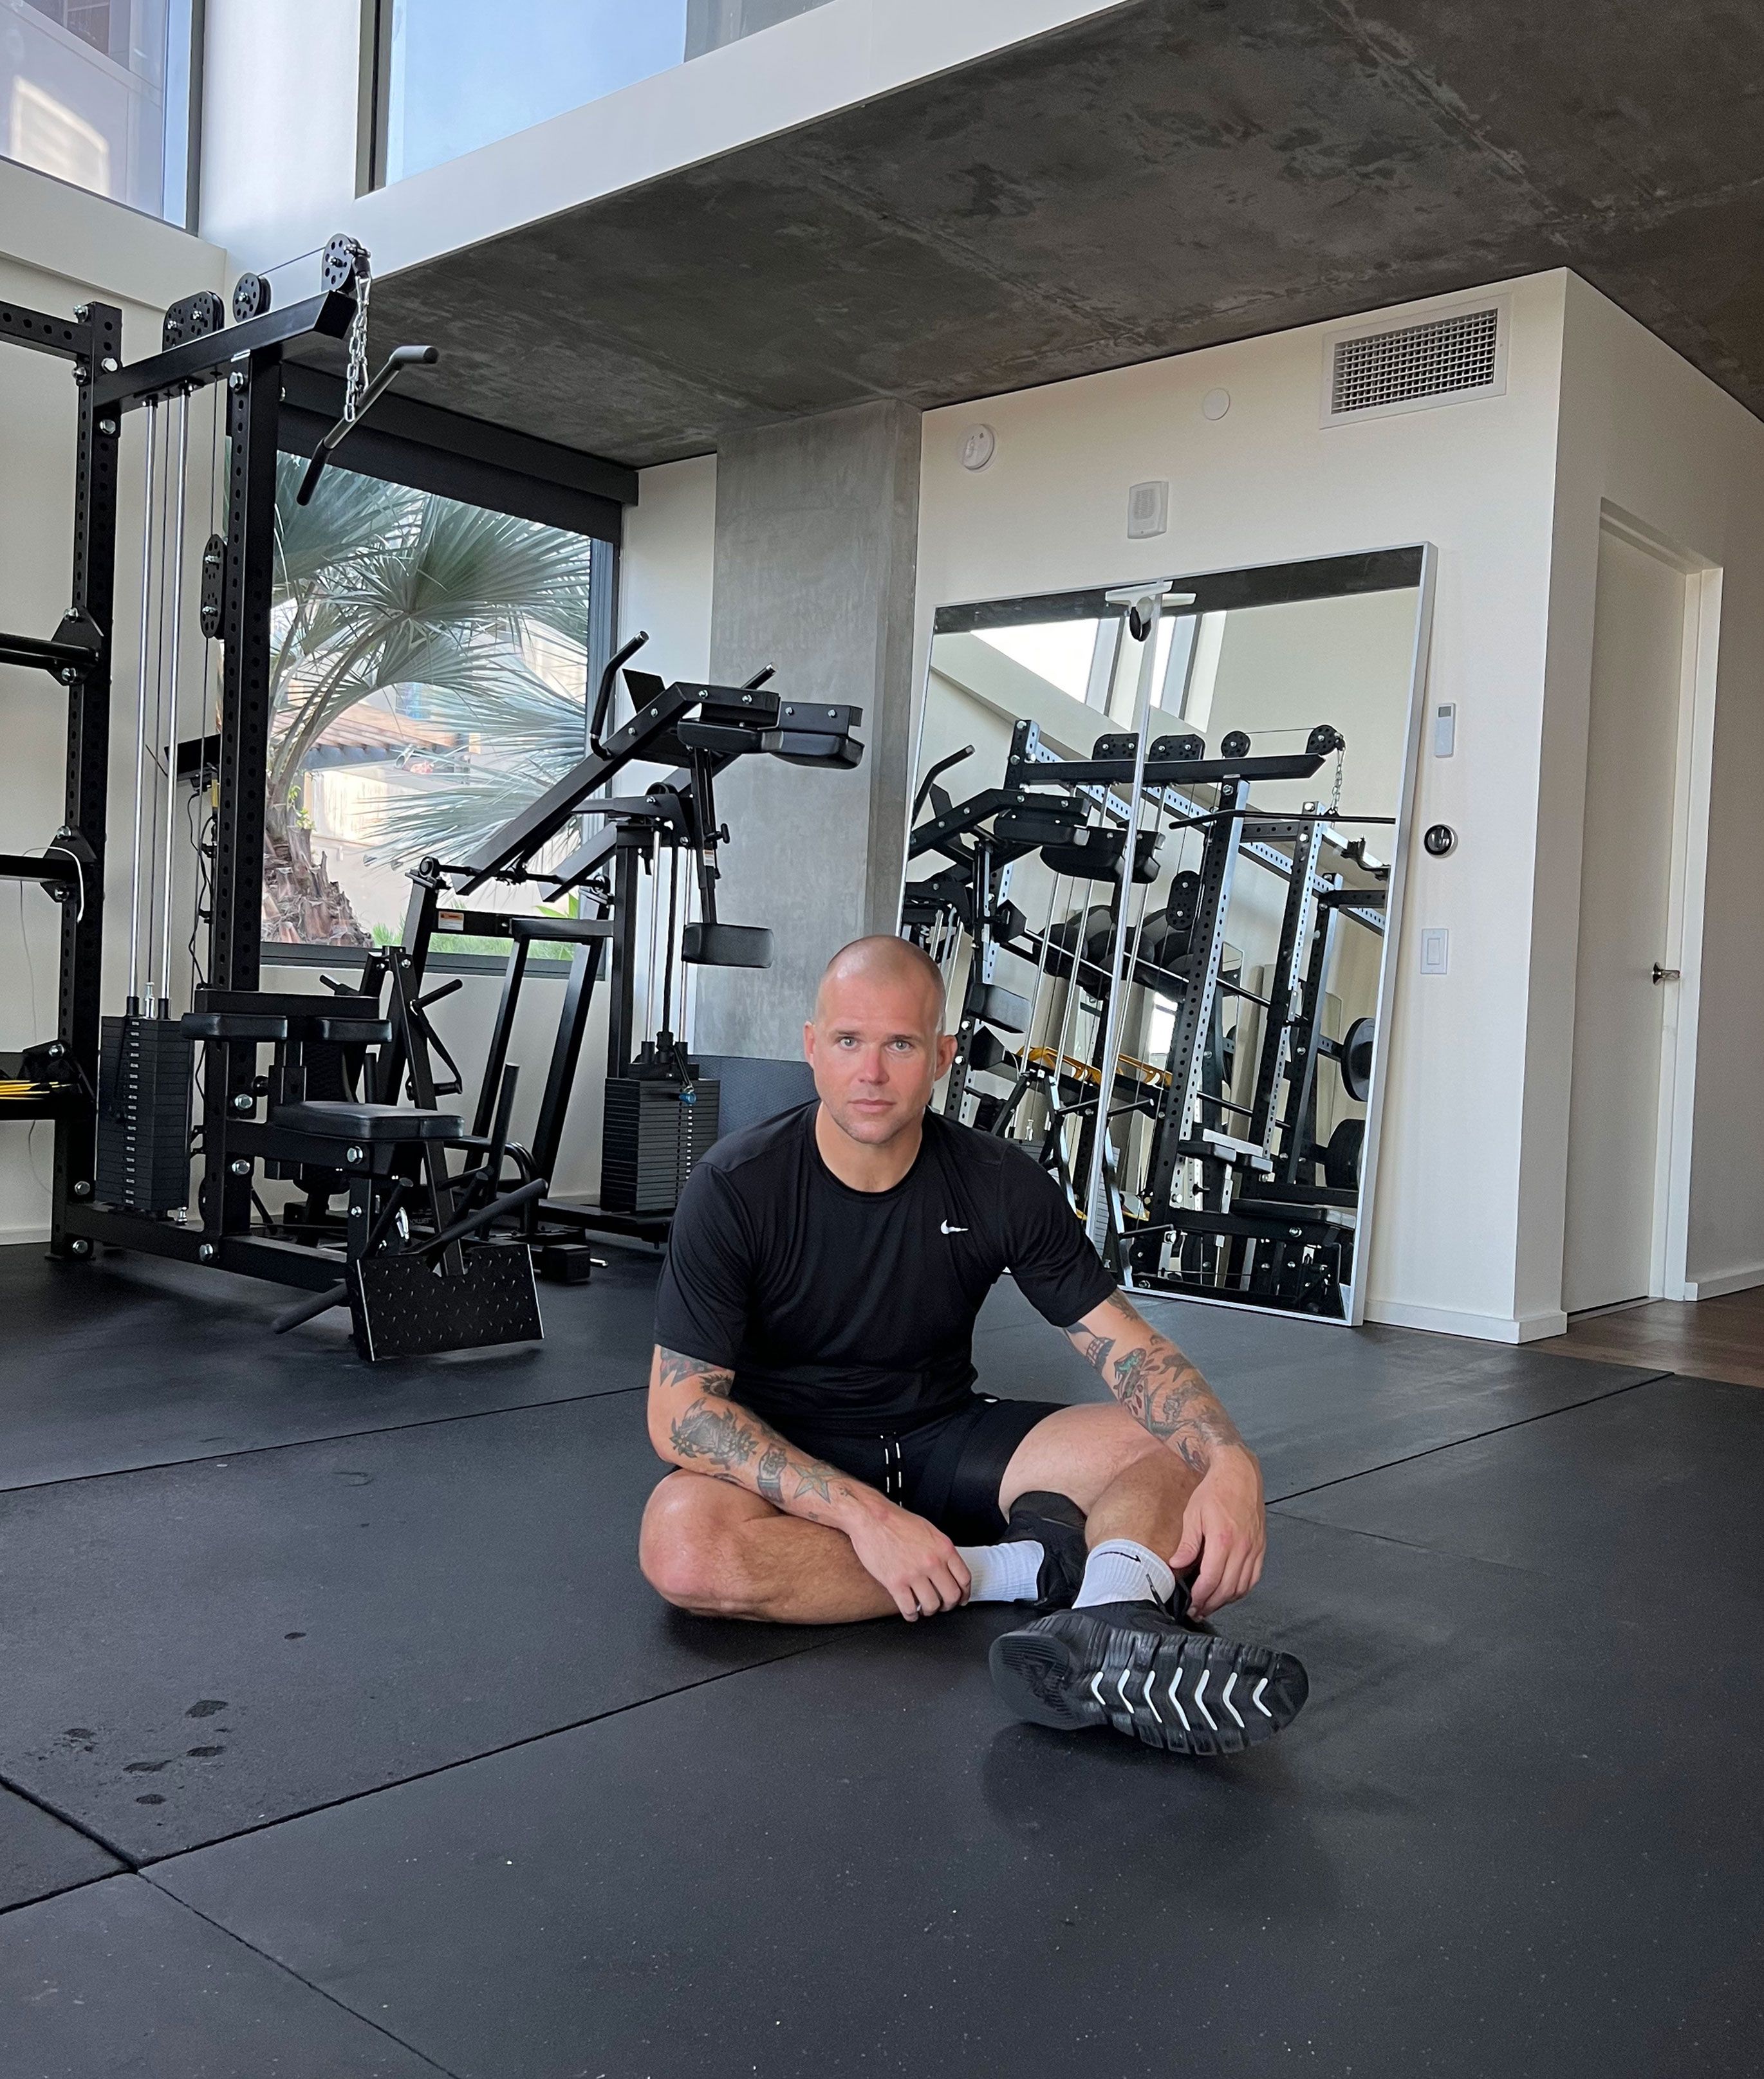 Chris Black on Travel Workout Gear and Dopp Kits 2019